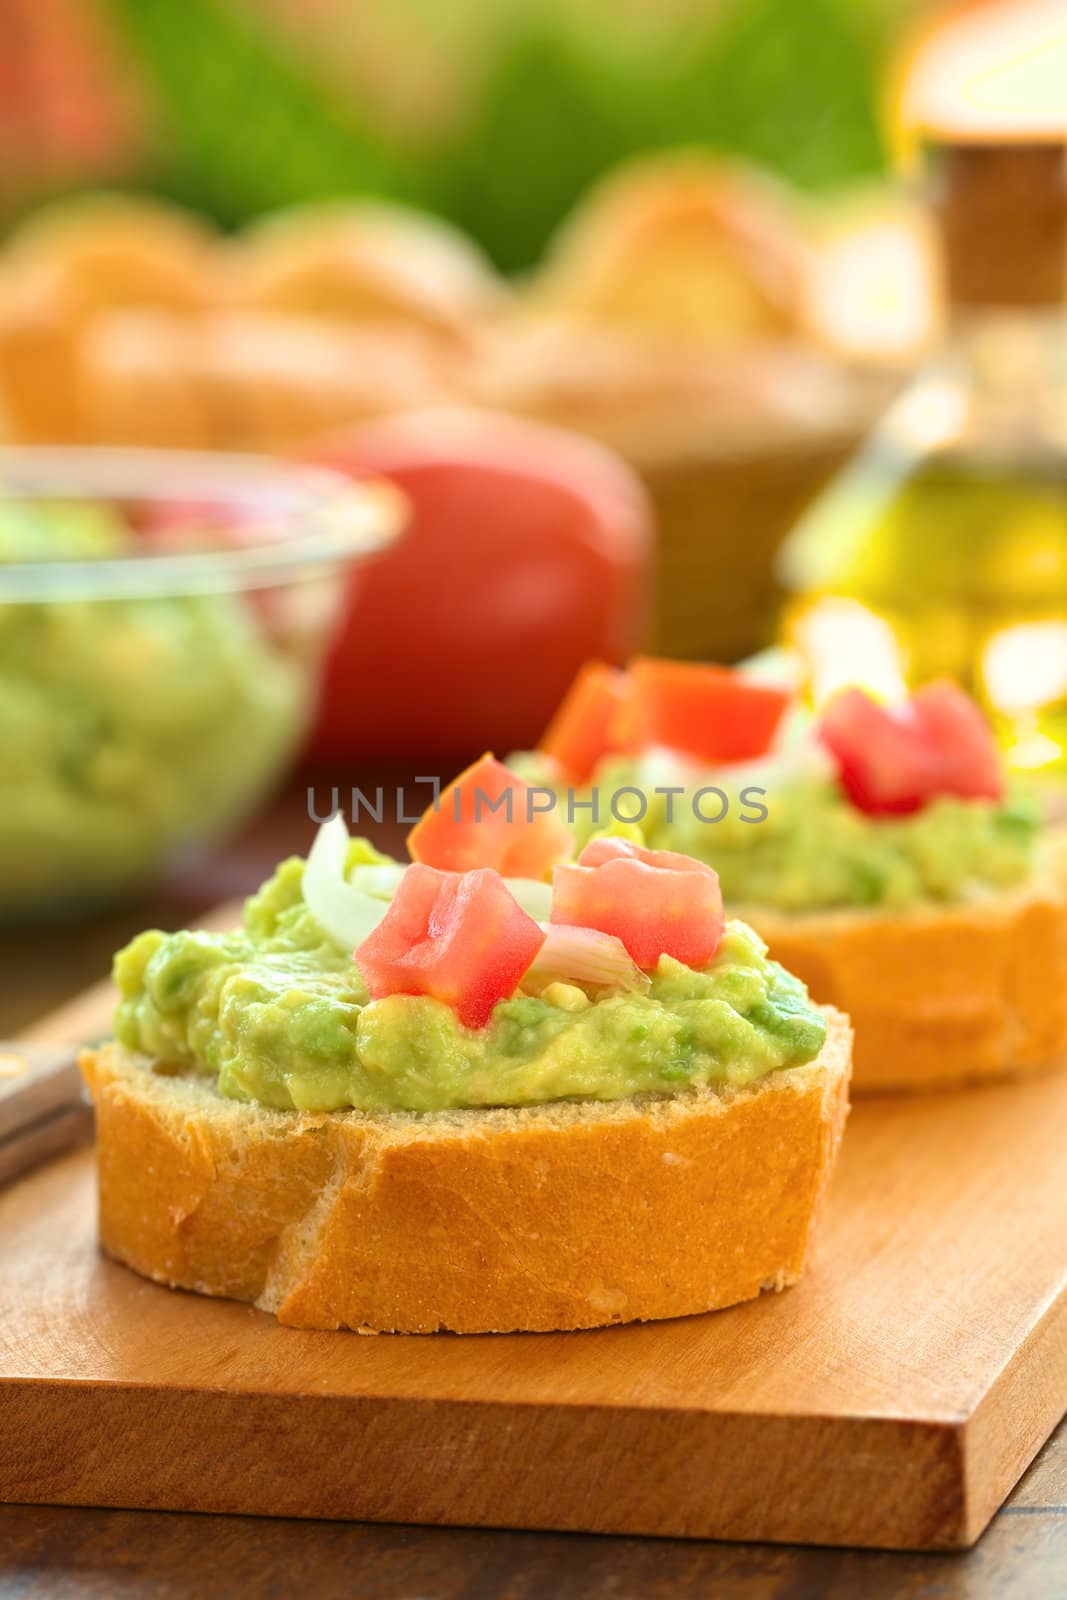 Snack of baguette slices with avocado cream, tomato and onion on wooden cutting board with ingredients in the back (Selective Focus, Focus on the front of the avocado cream on the first baguette slice)